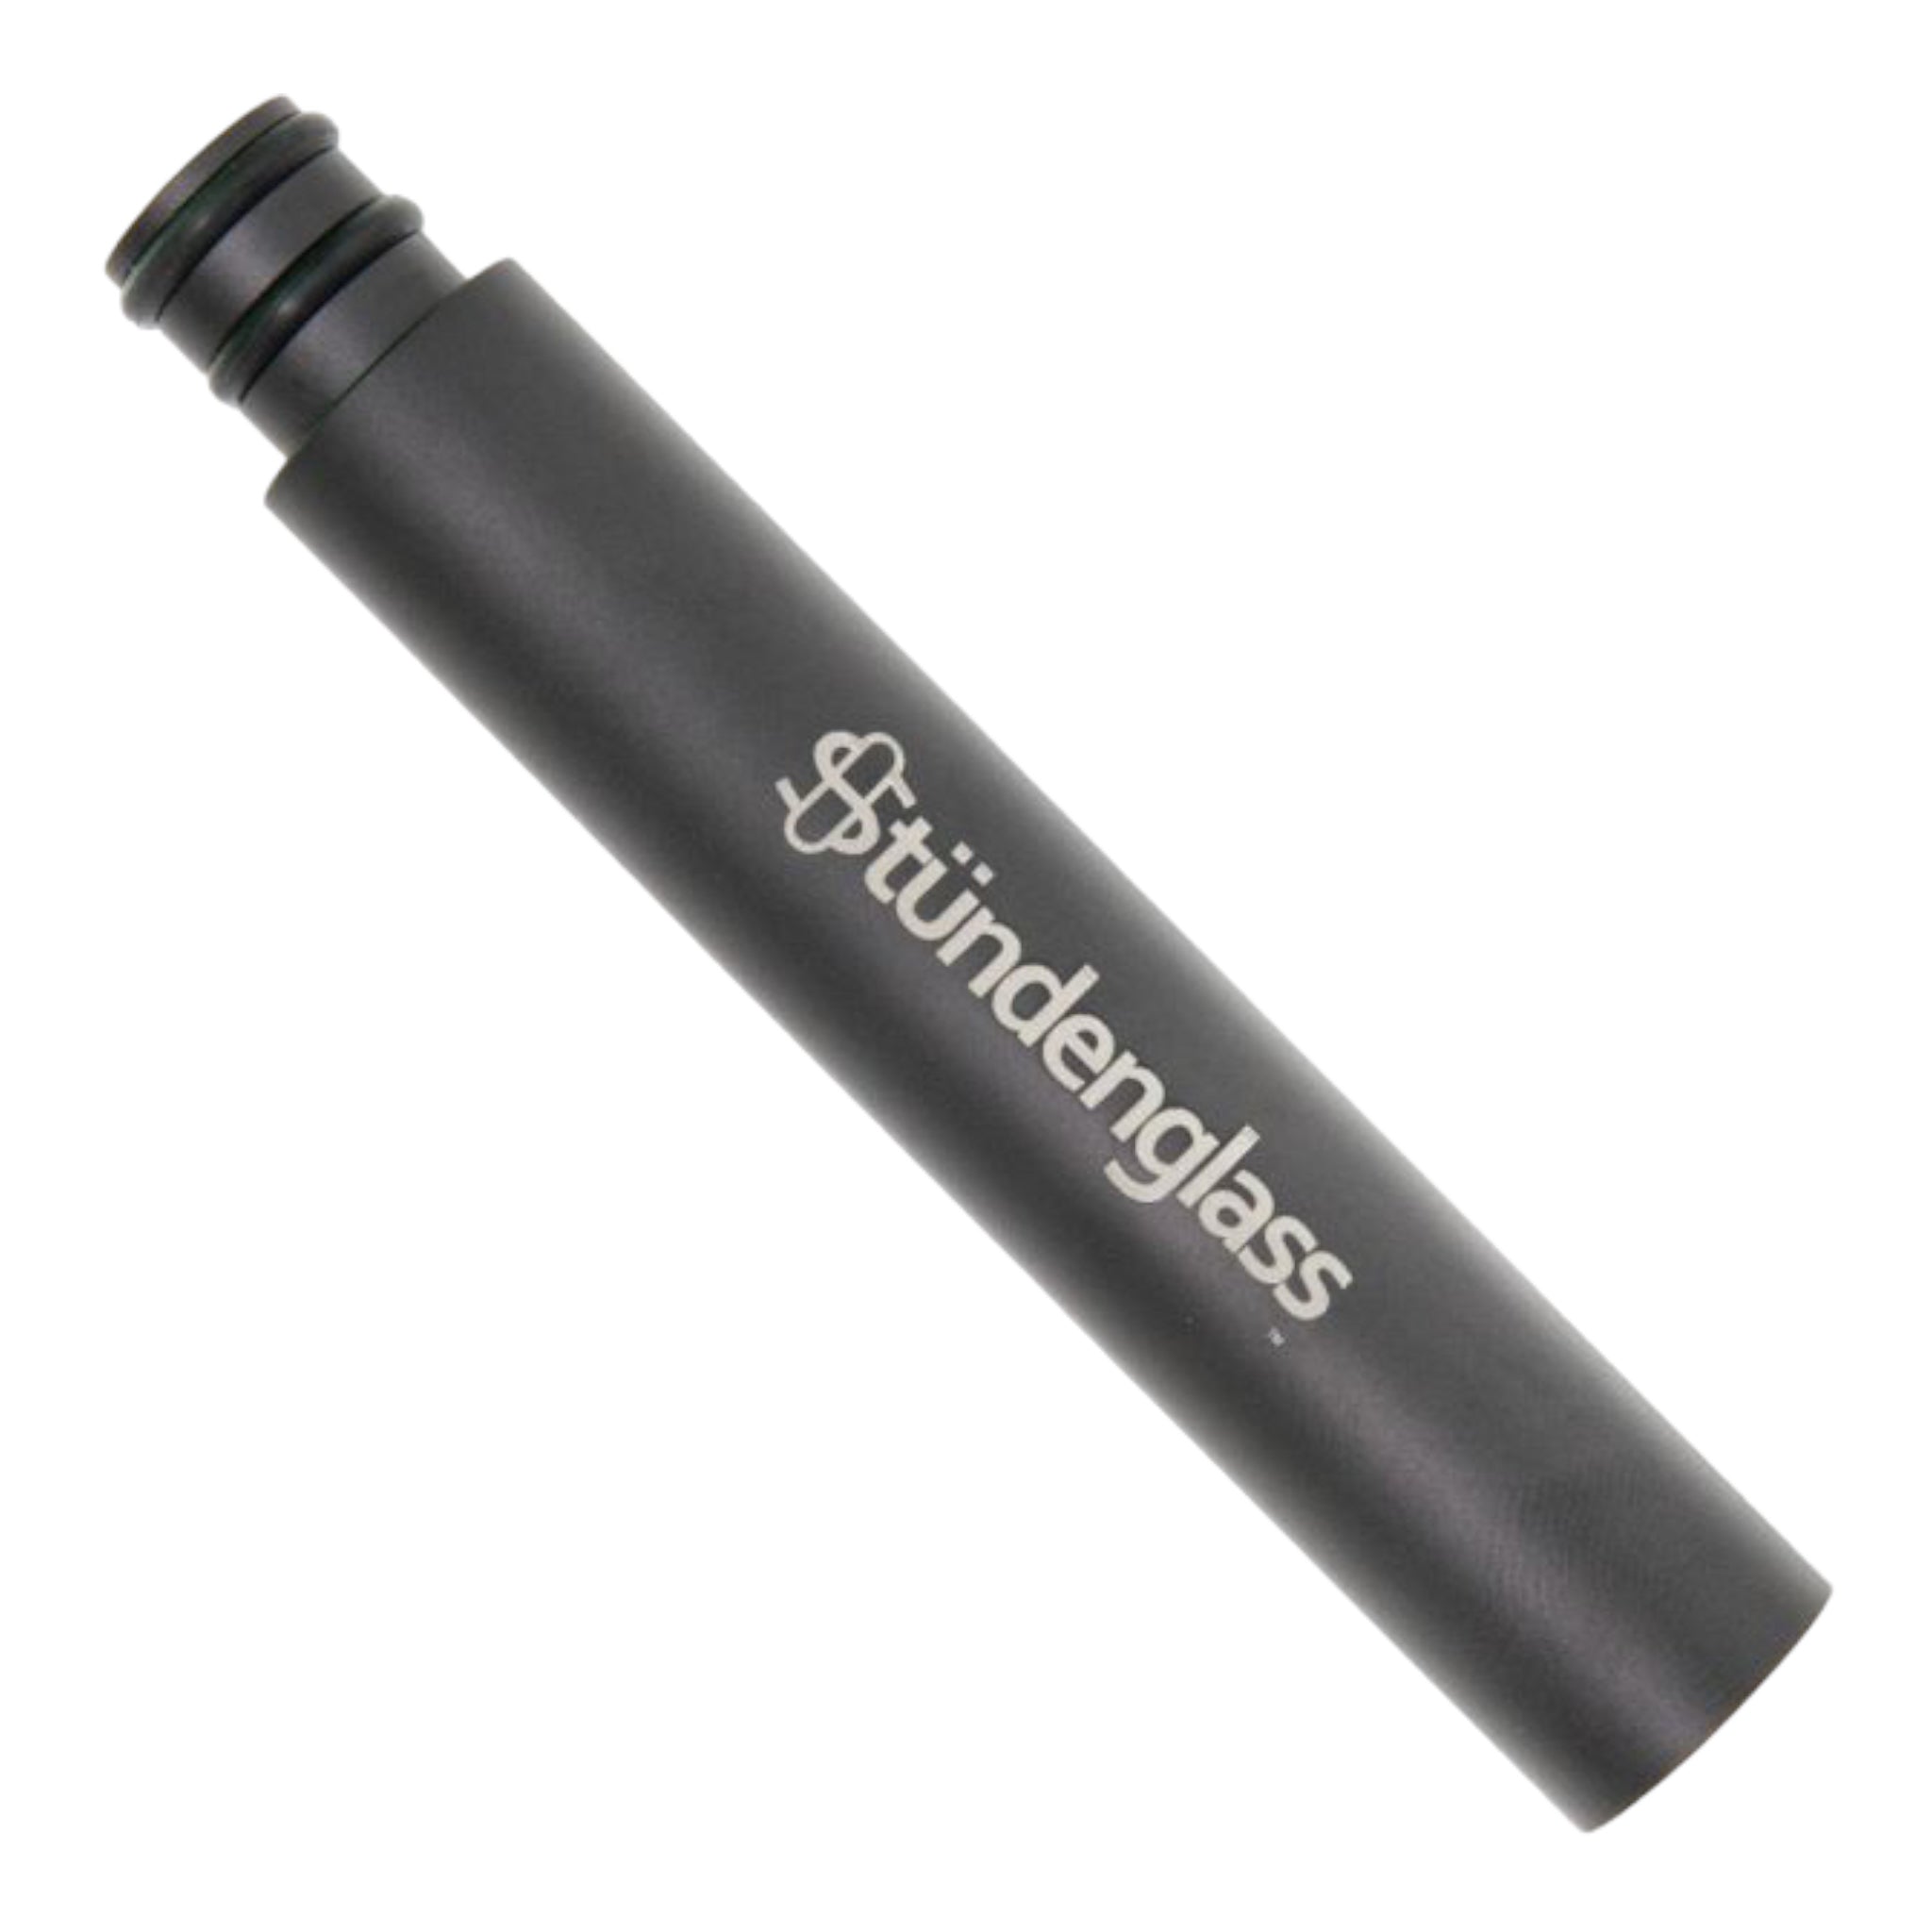 Stundenglass Replacement Mouthpiece - Black